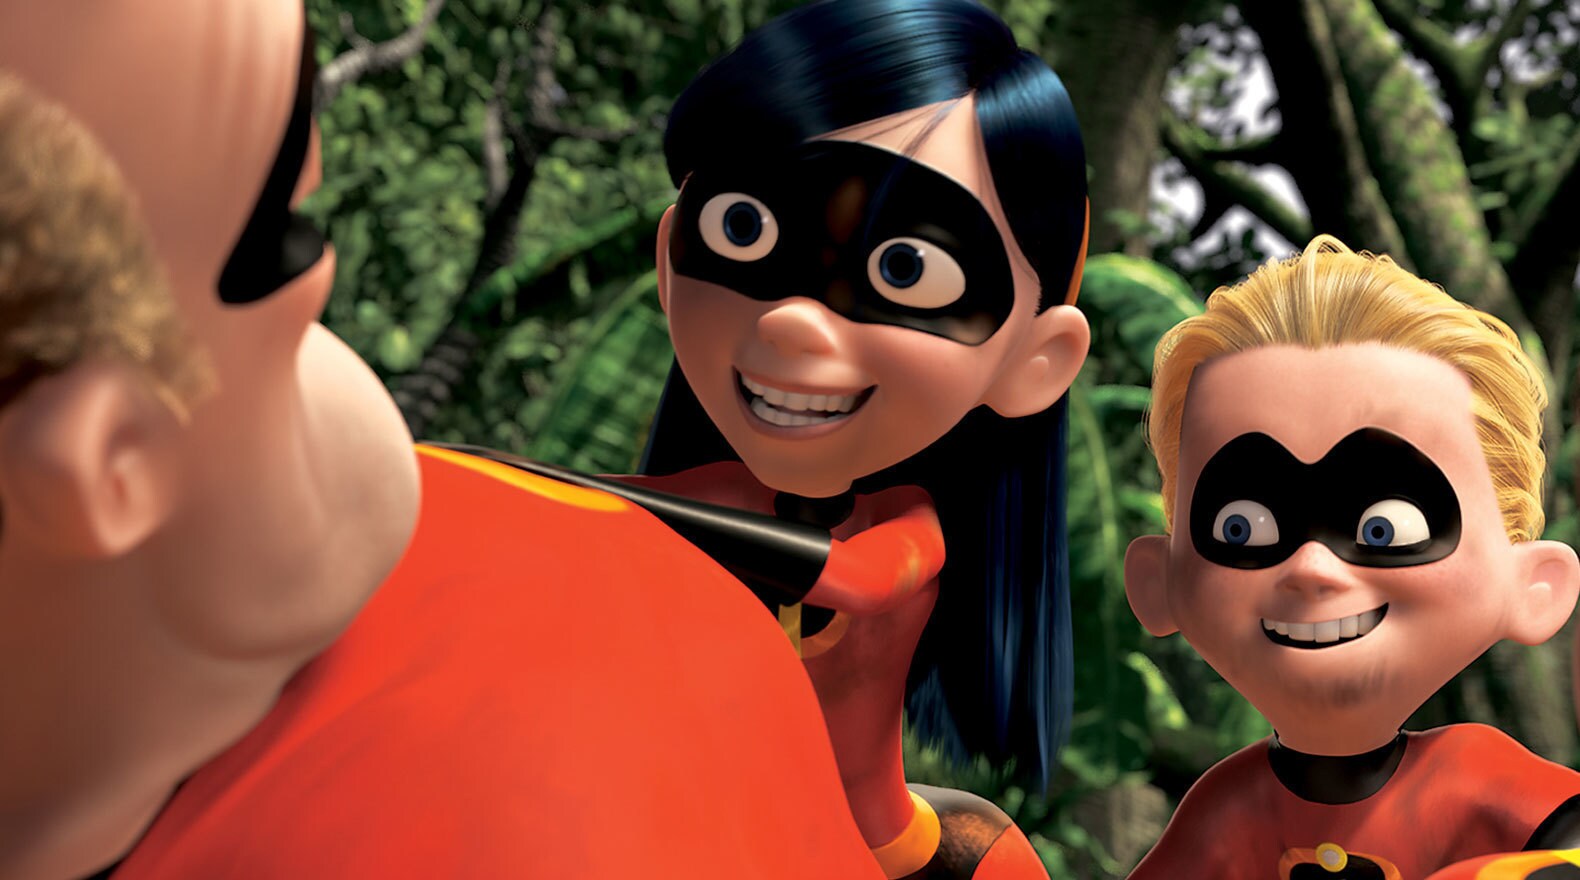 Violet and Dash are all smiles after meeting up with their dad in "The Incredibles"